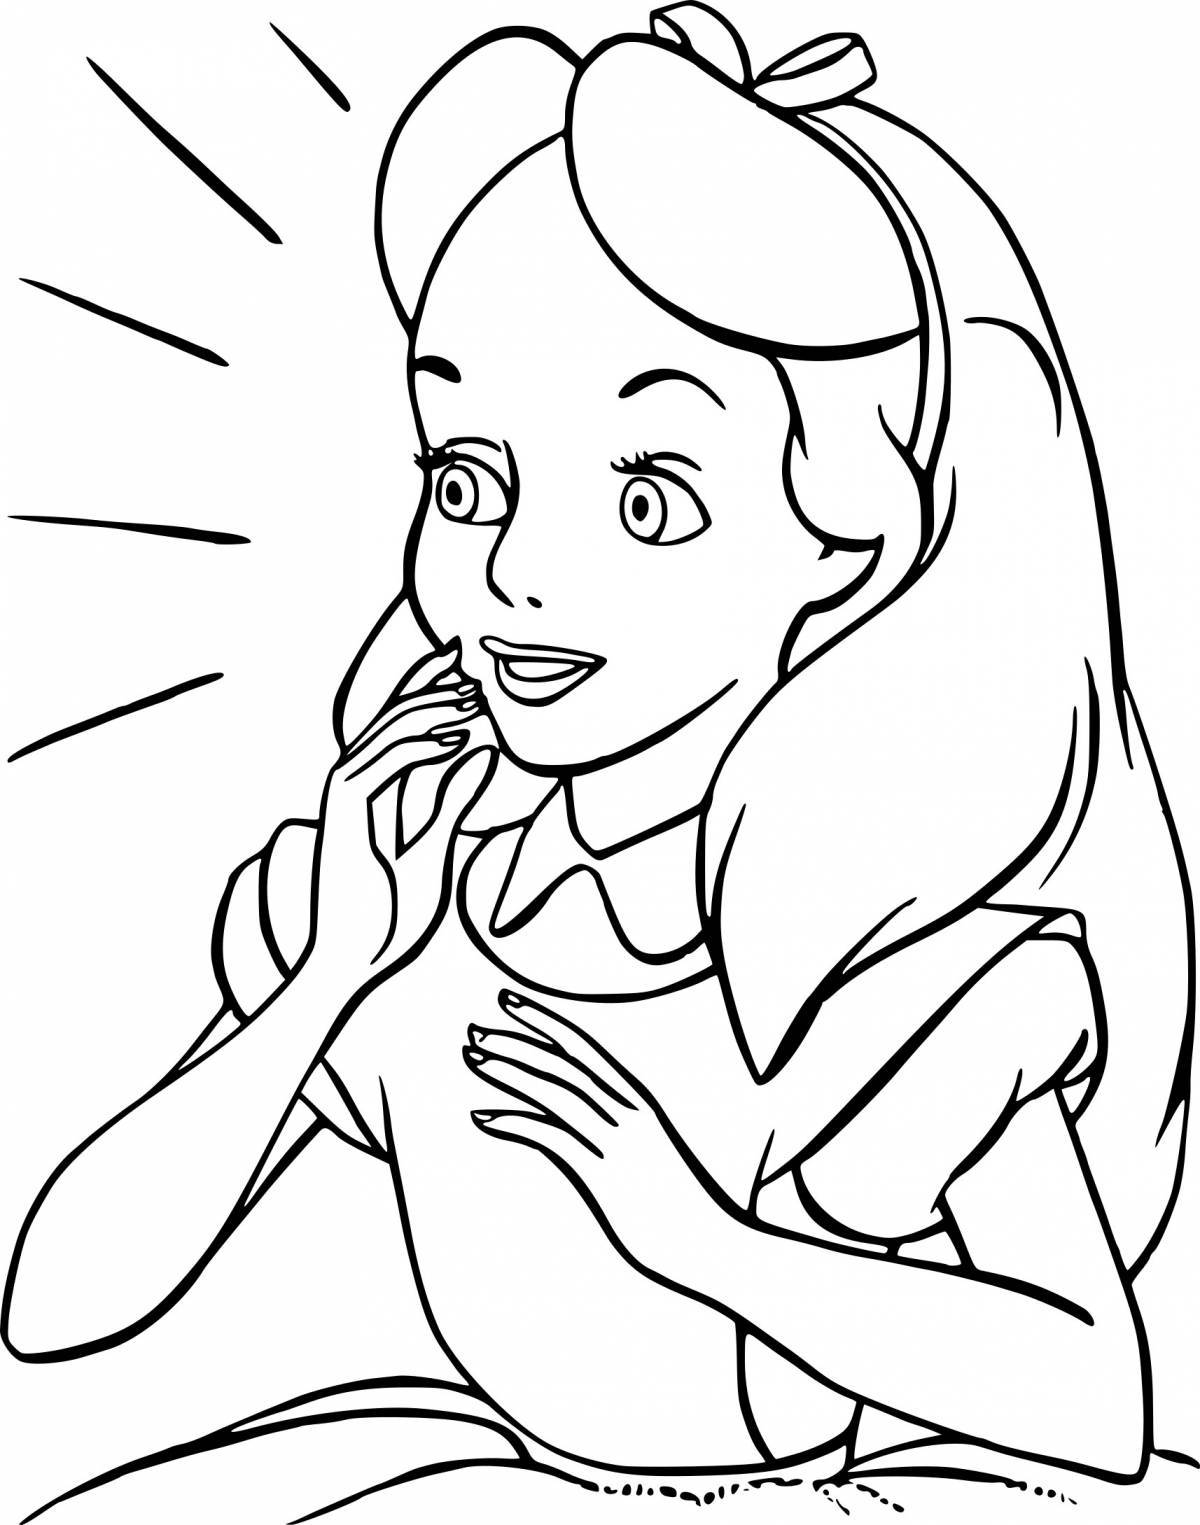 Animated alice coloring page